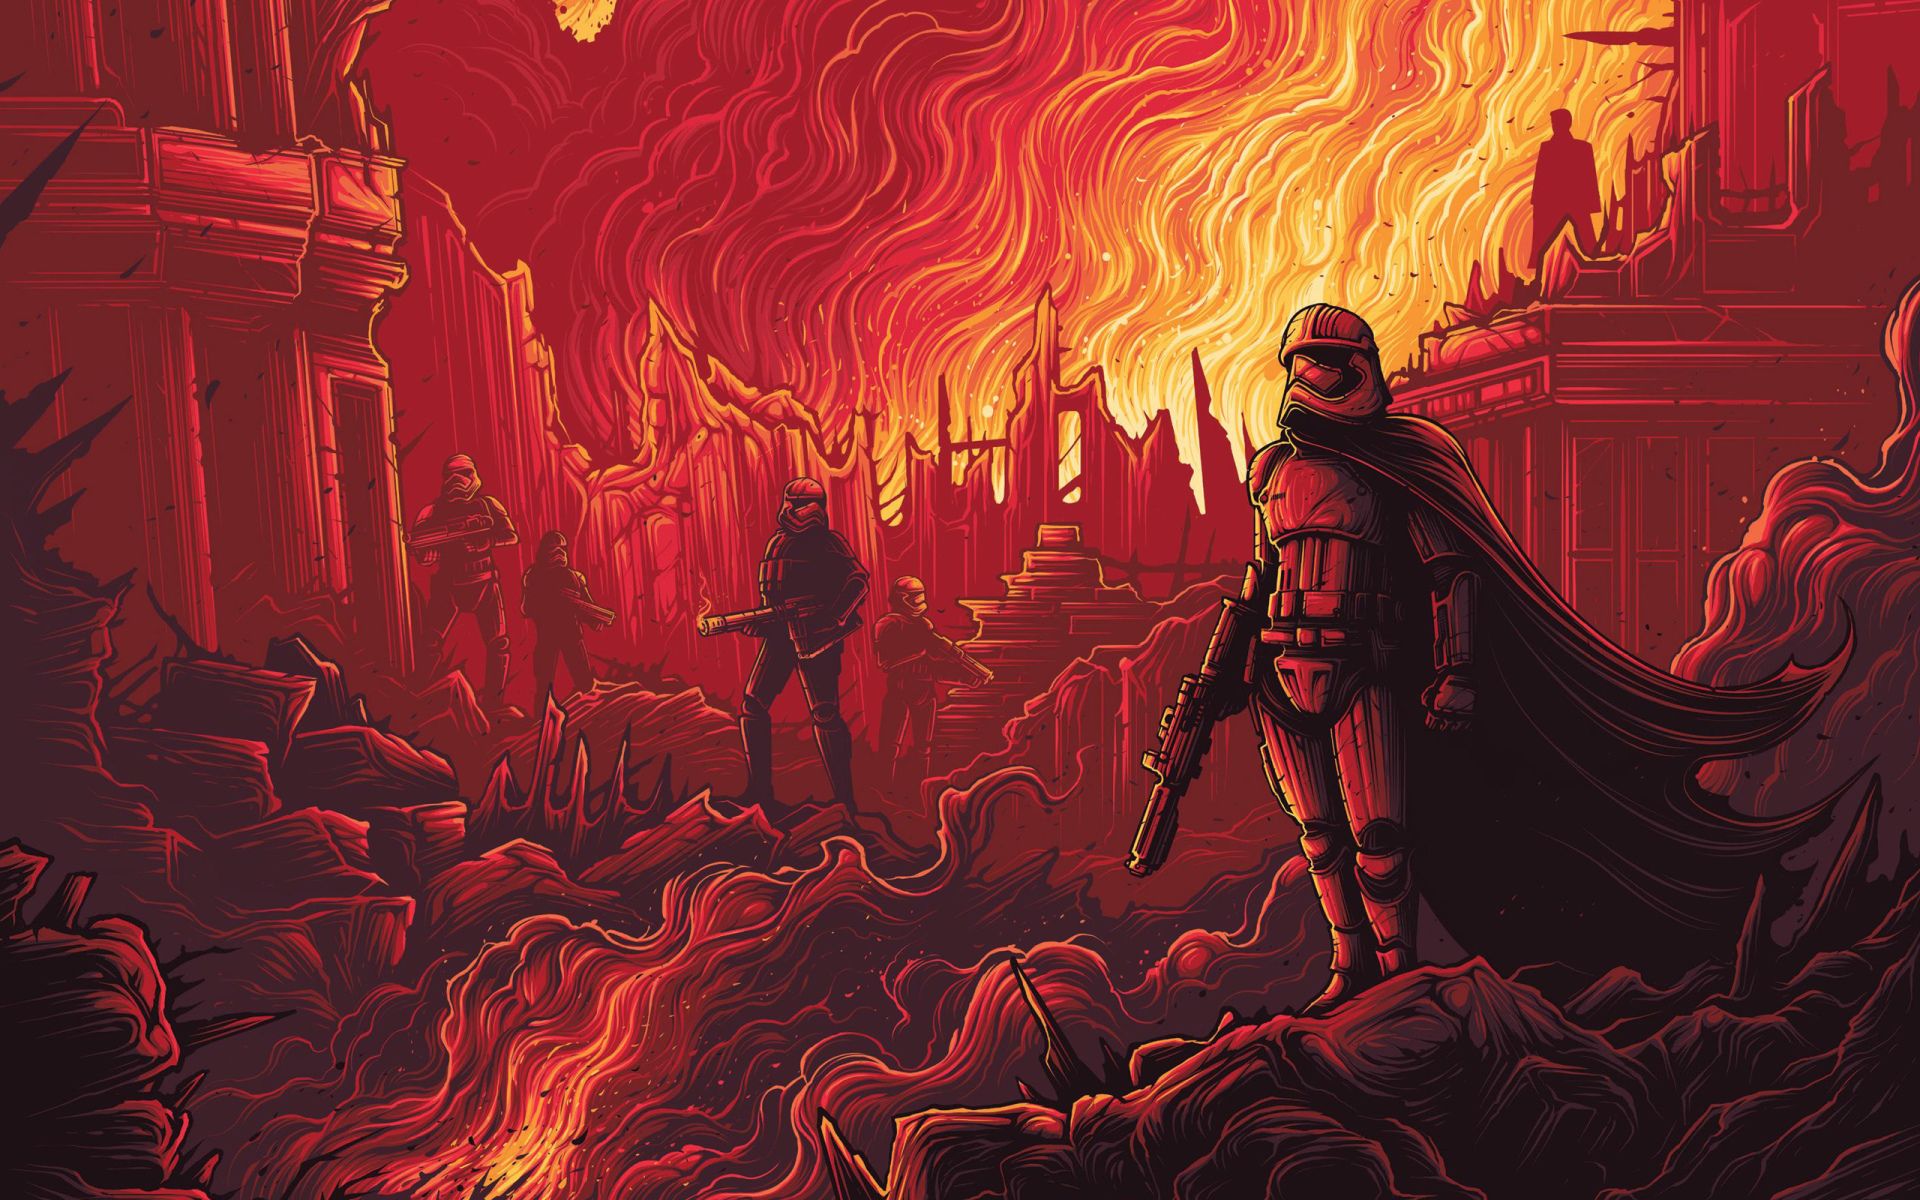 Star Wars Episode Vii: The Force Awakens Wallpapers